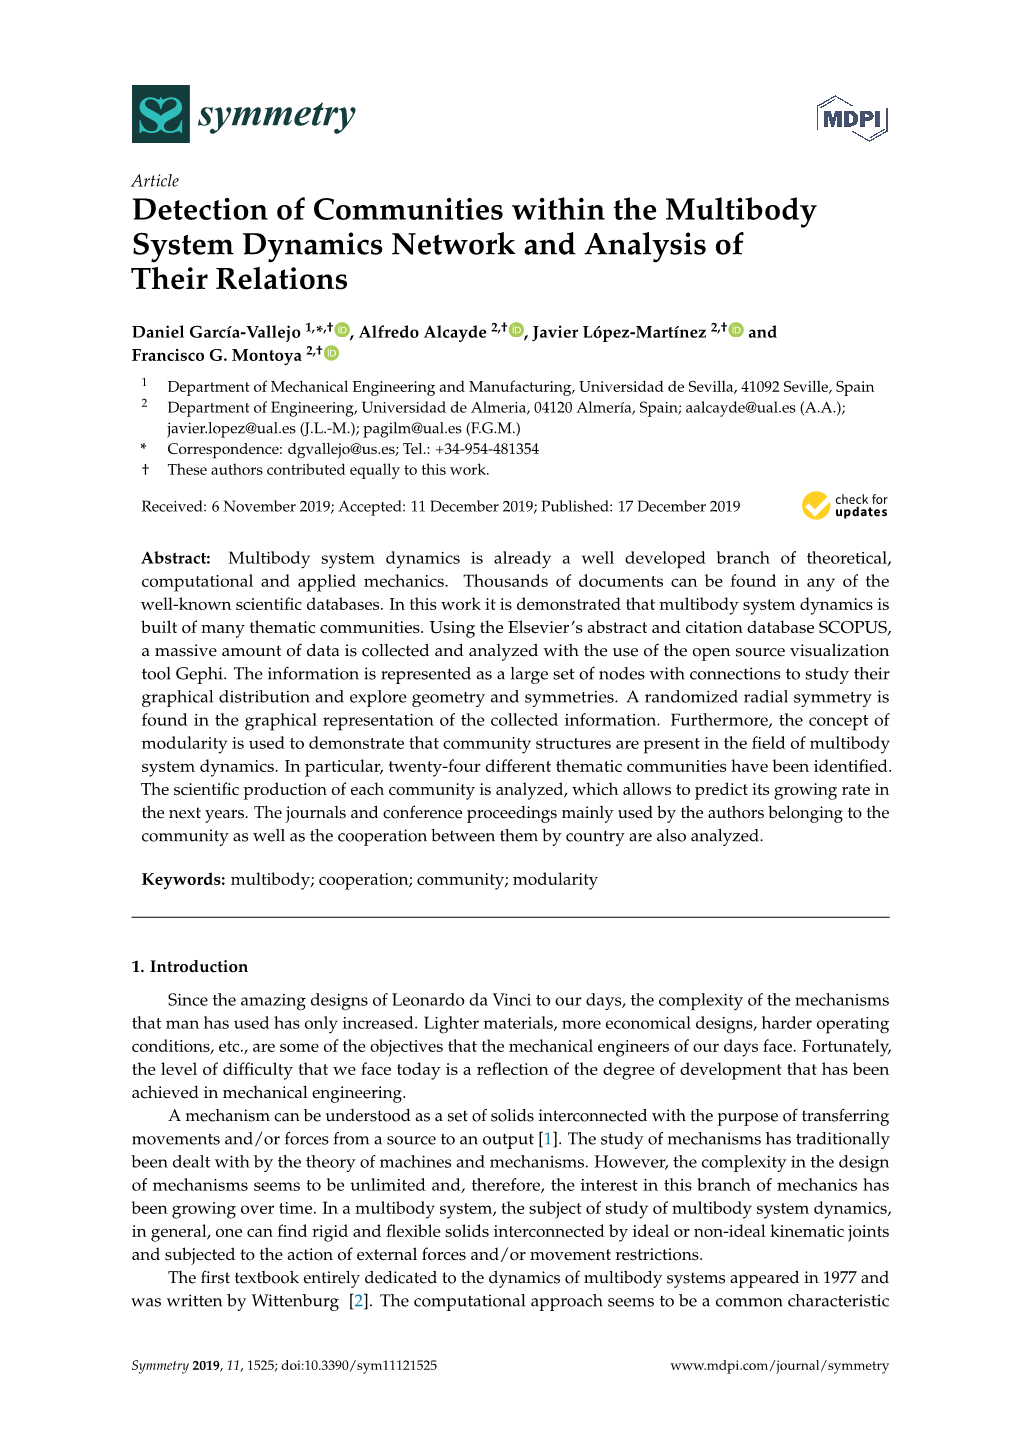 Detection of Communities Within the Multibody System Dynamics Network and Analysis of Their Relations